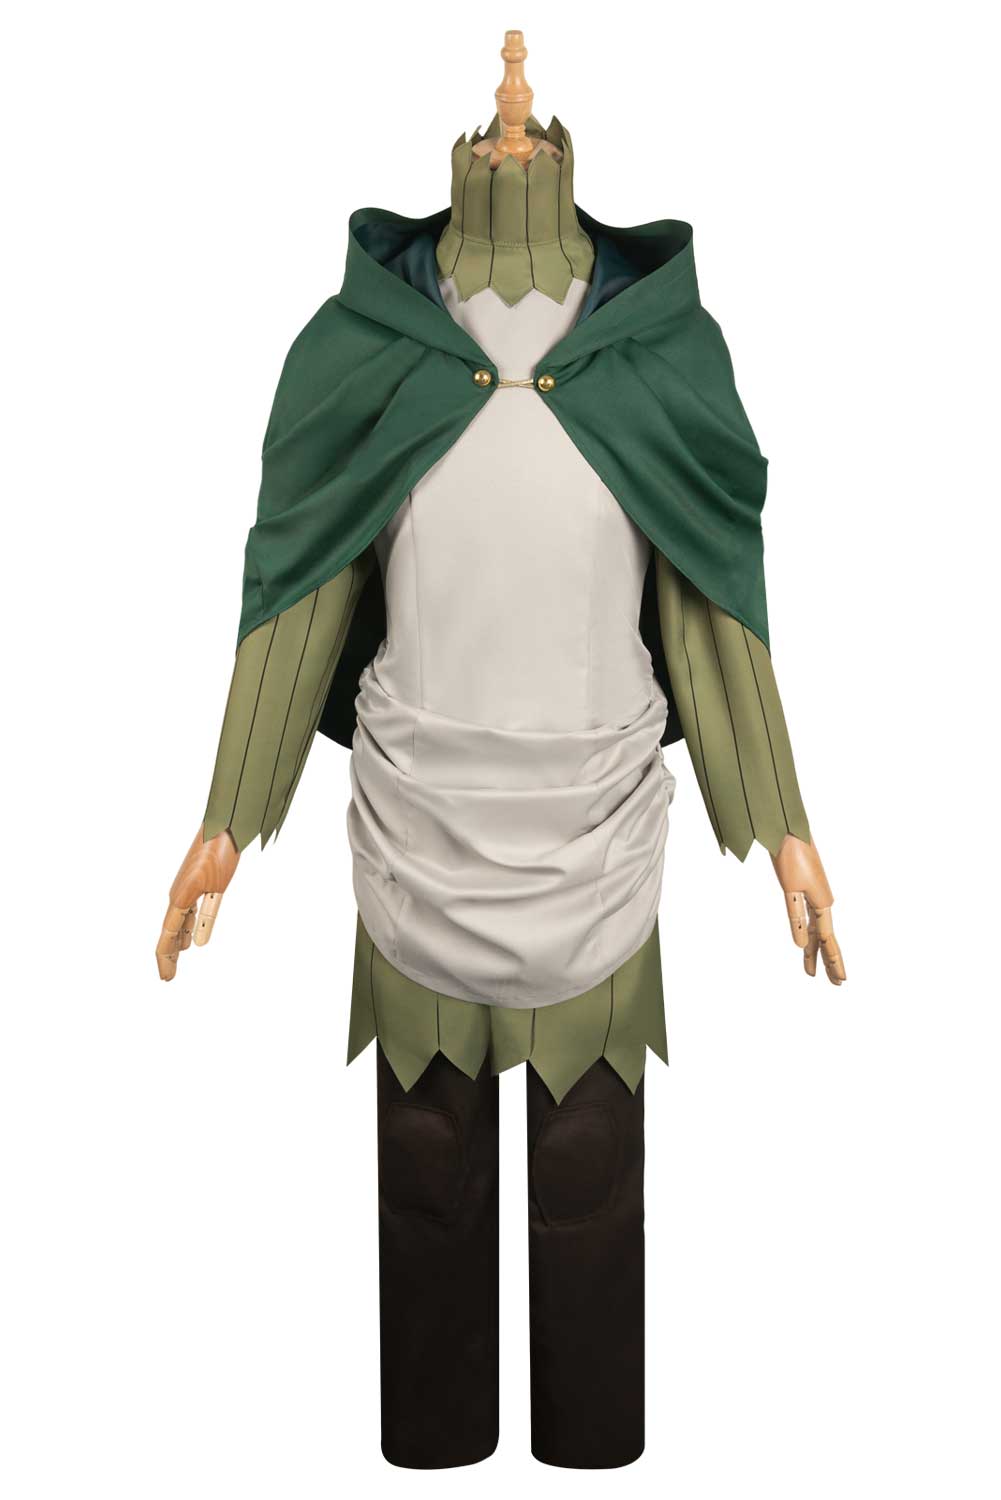 Anime Delicious in Dungeon Mithrun Green Outfits Halloween Carnival Suit Cosplay Costume 